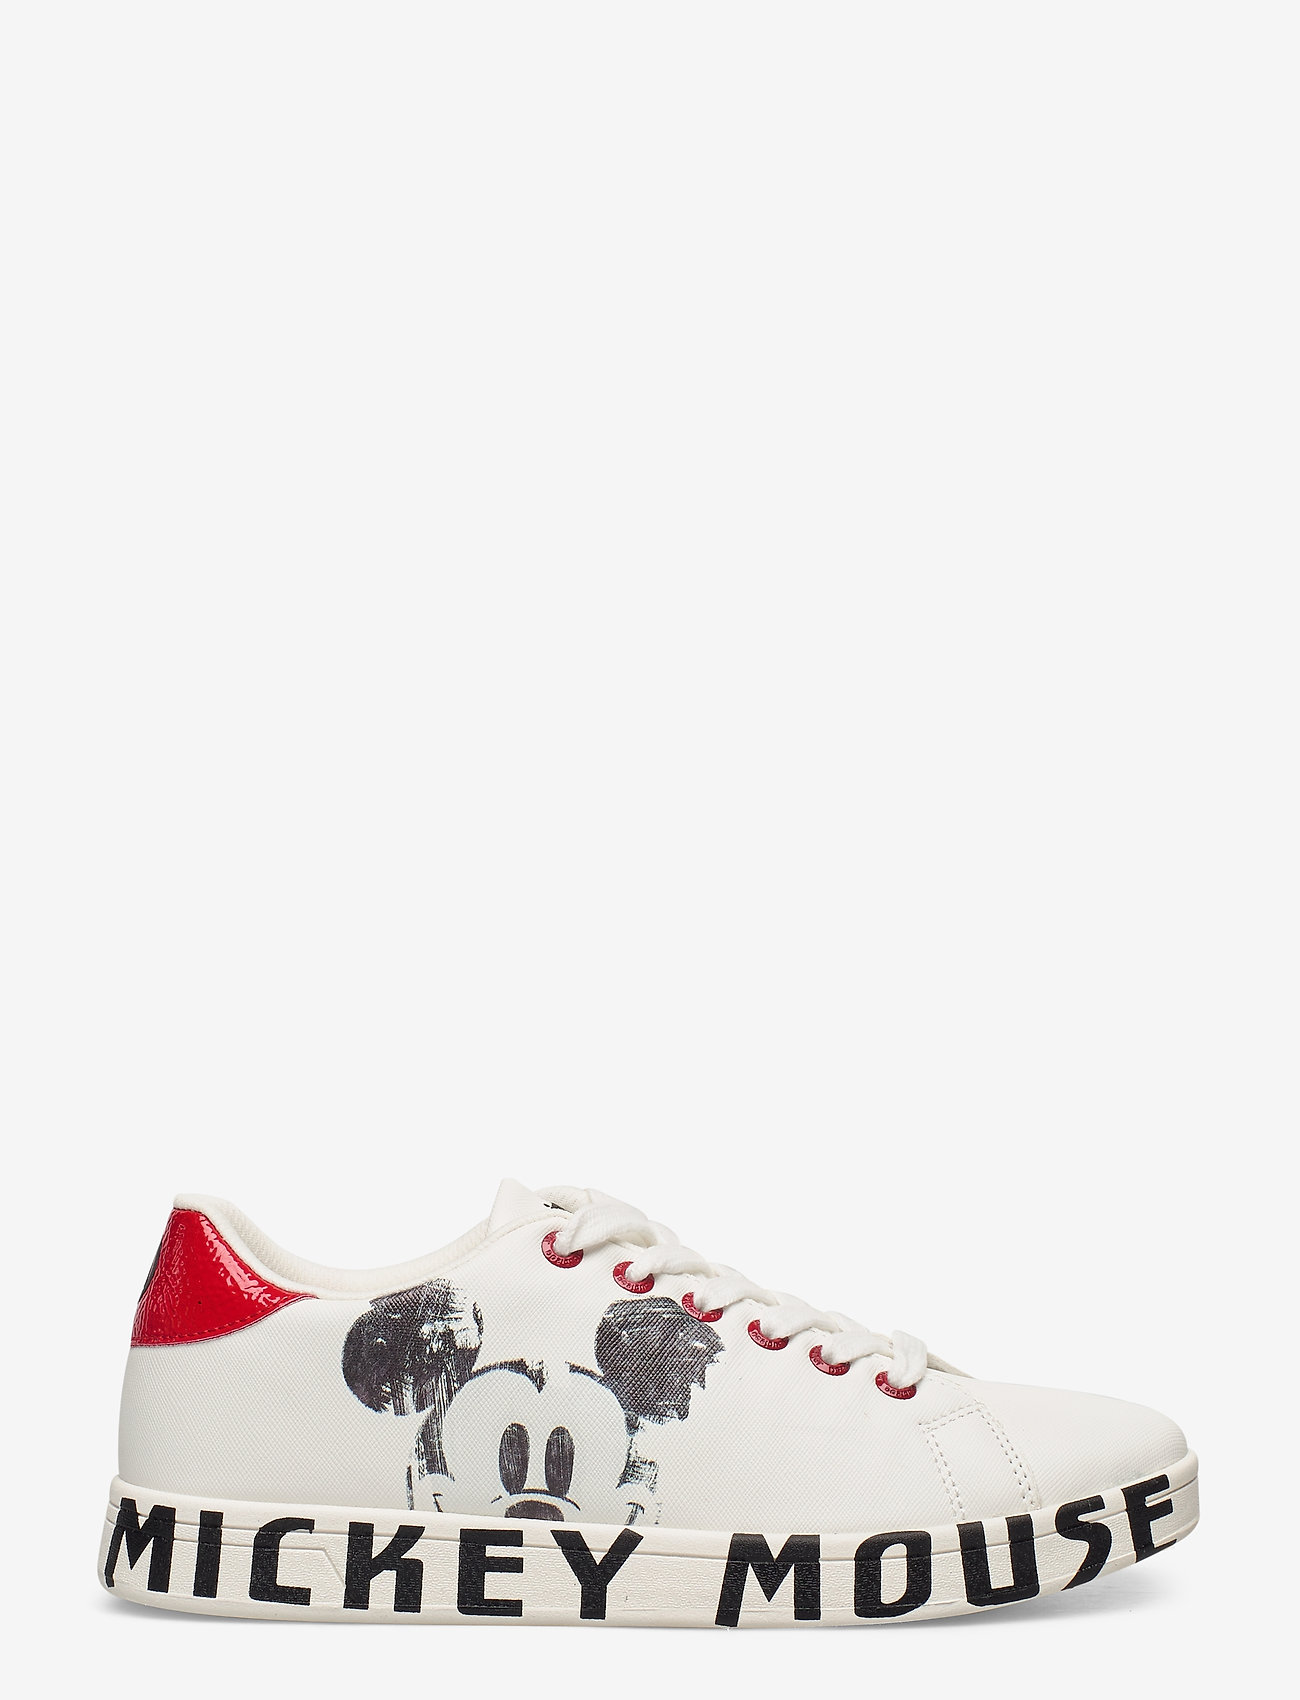 desigual mickey mouse shoes